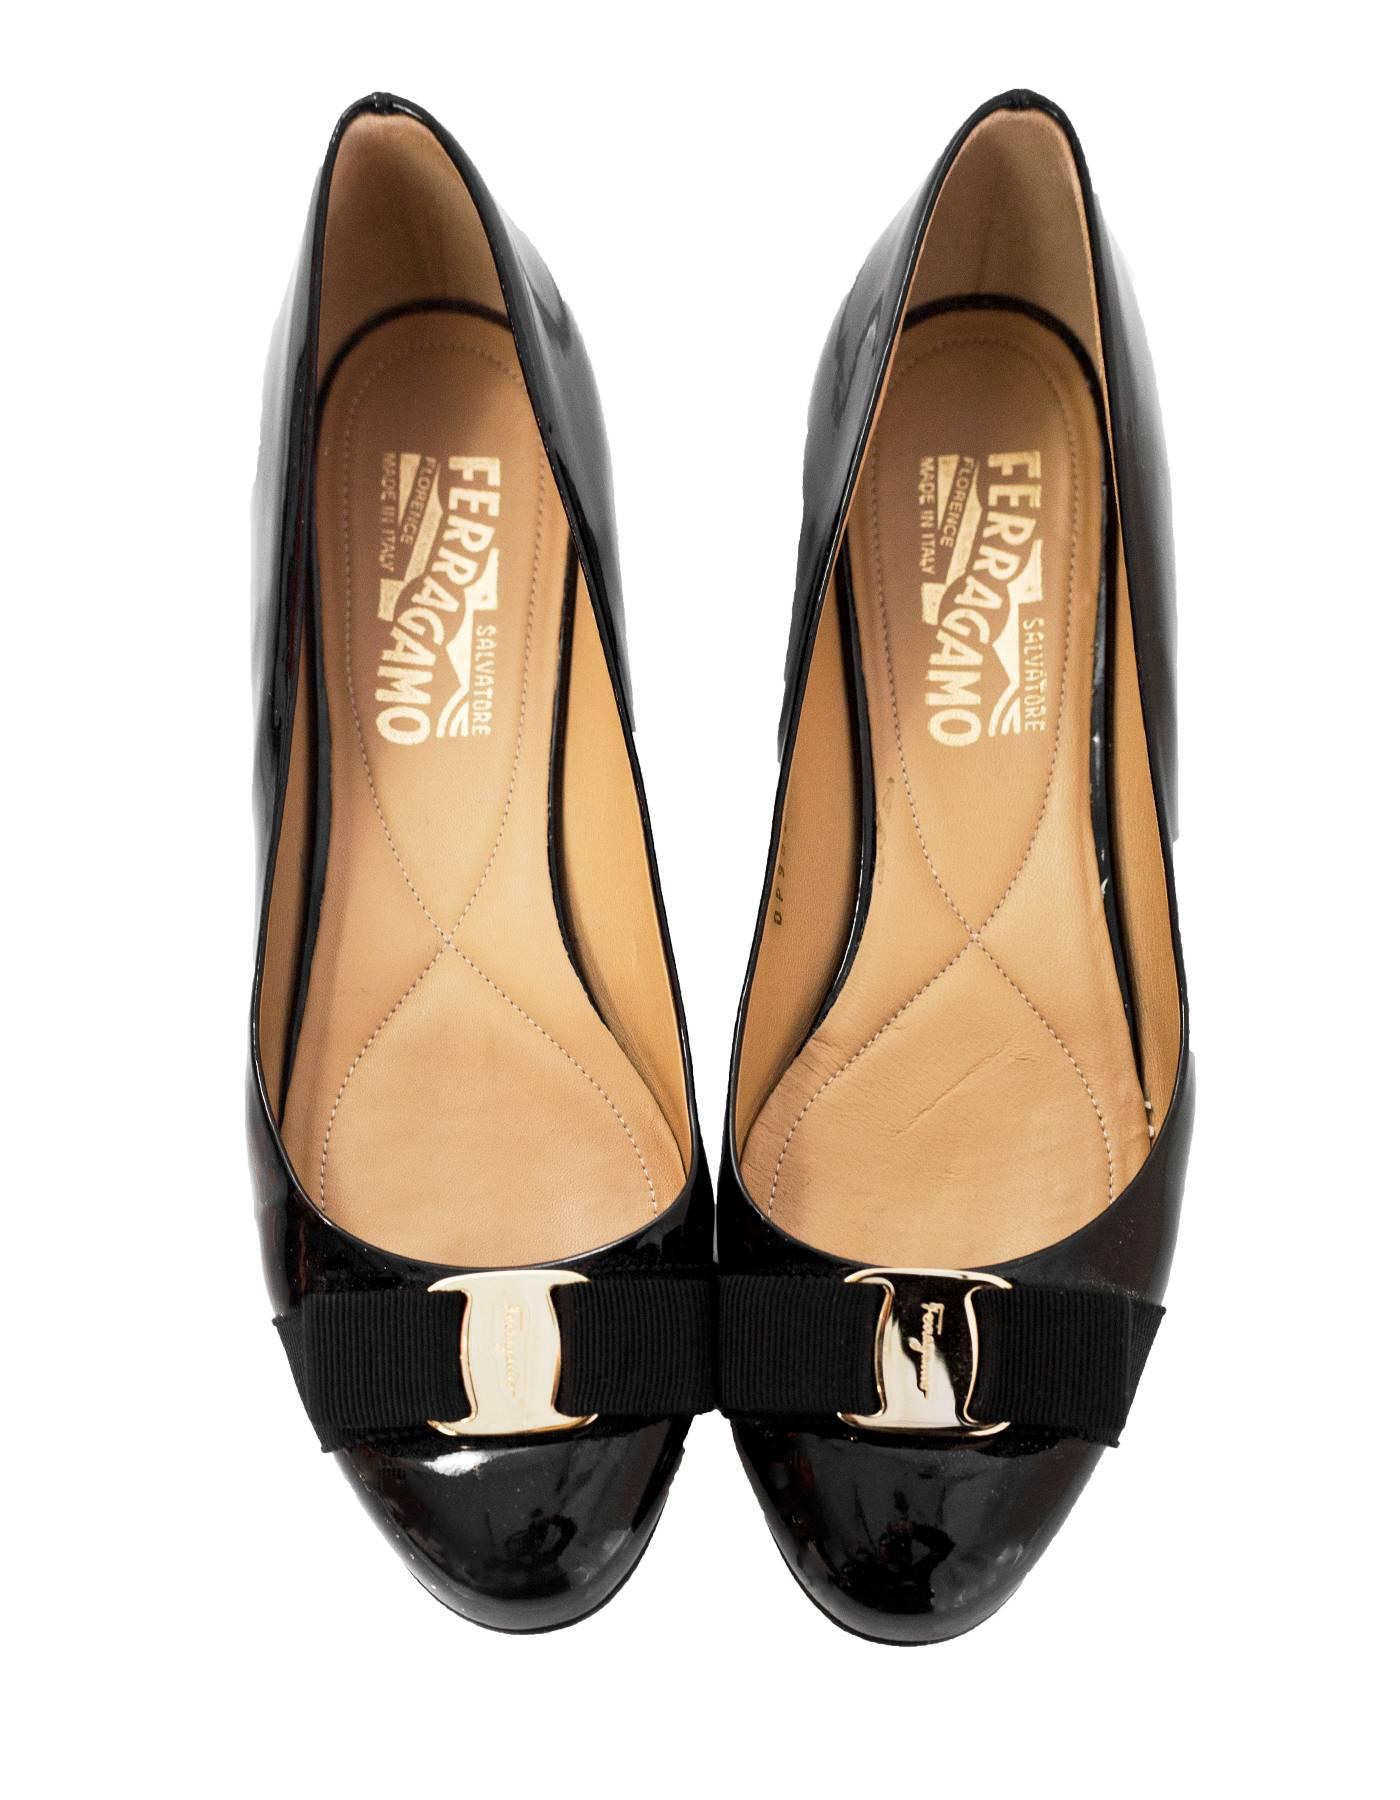 Salvatore Ferragamo Black Patent Leather Varina Bow Flats Sz 7.5C with Box, DB In Excellent Condition In New York, NY